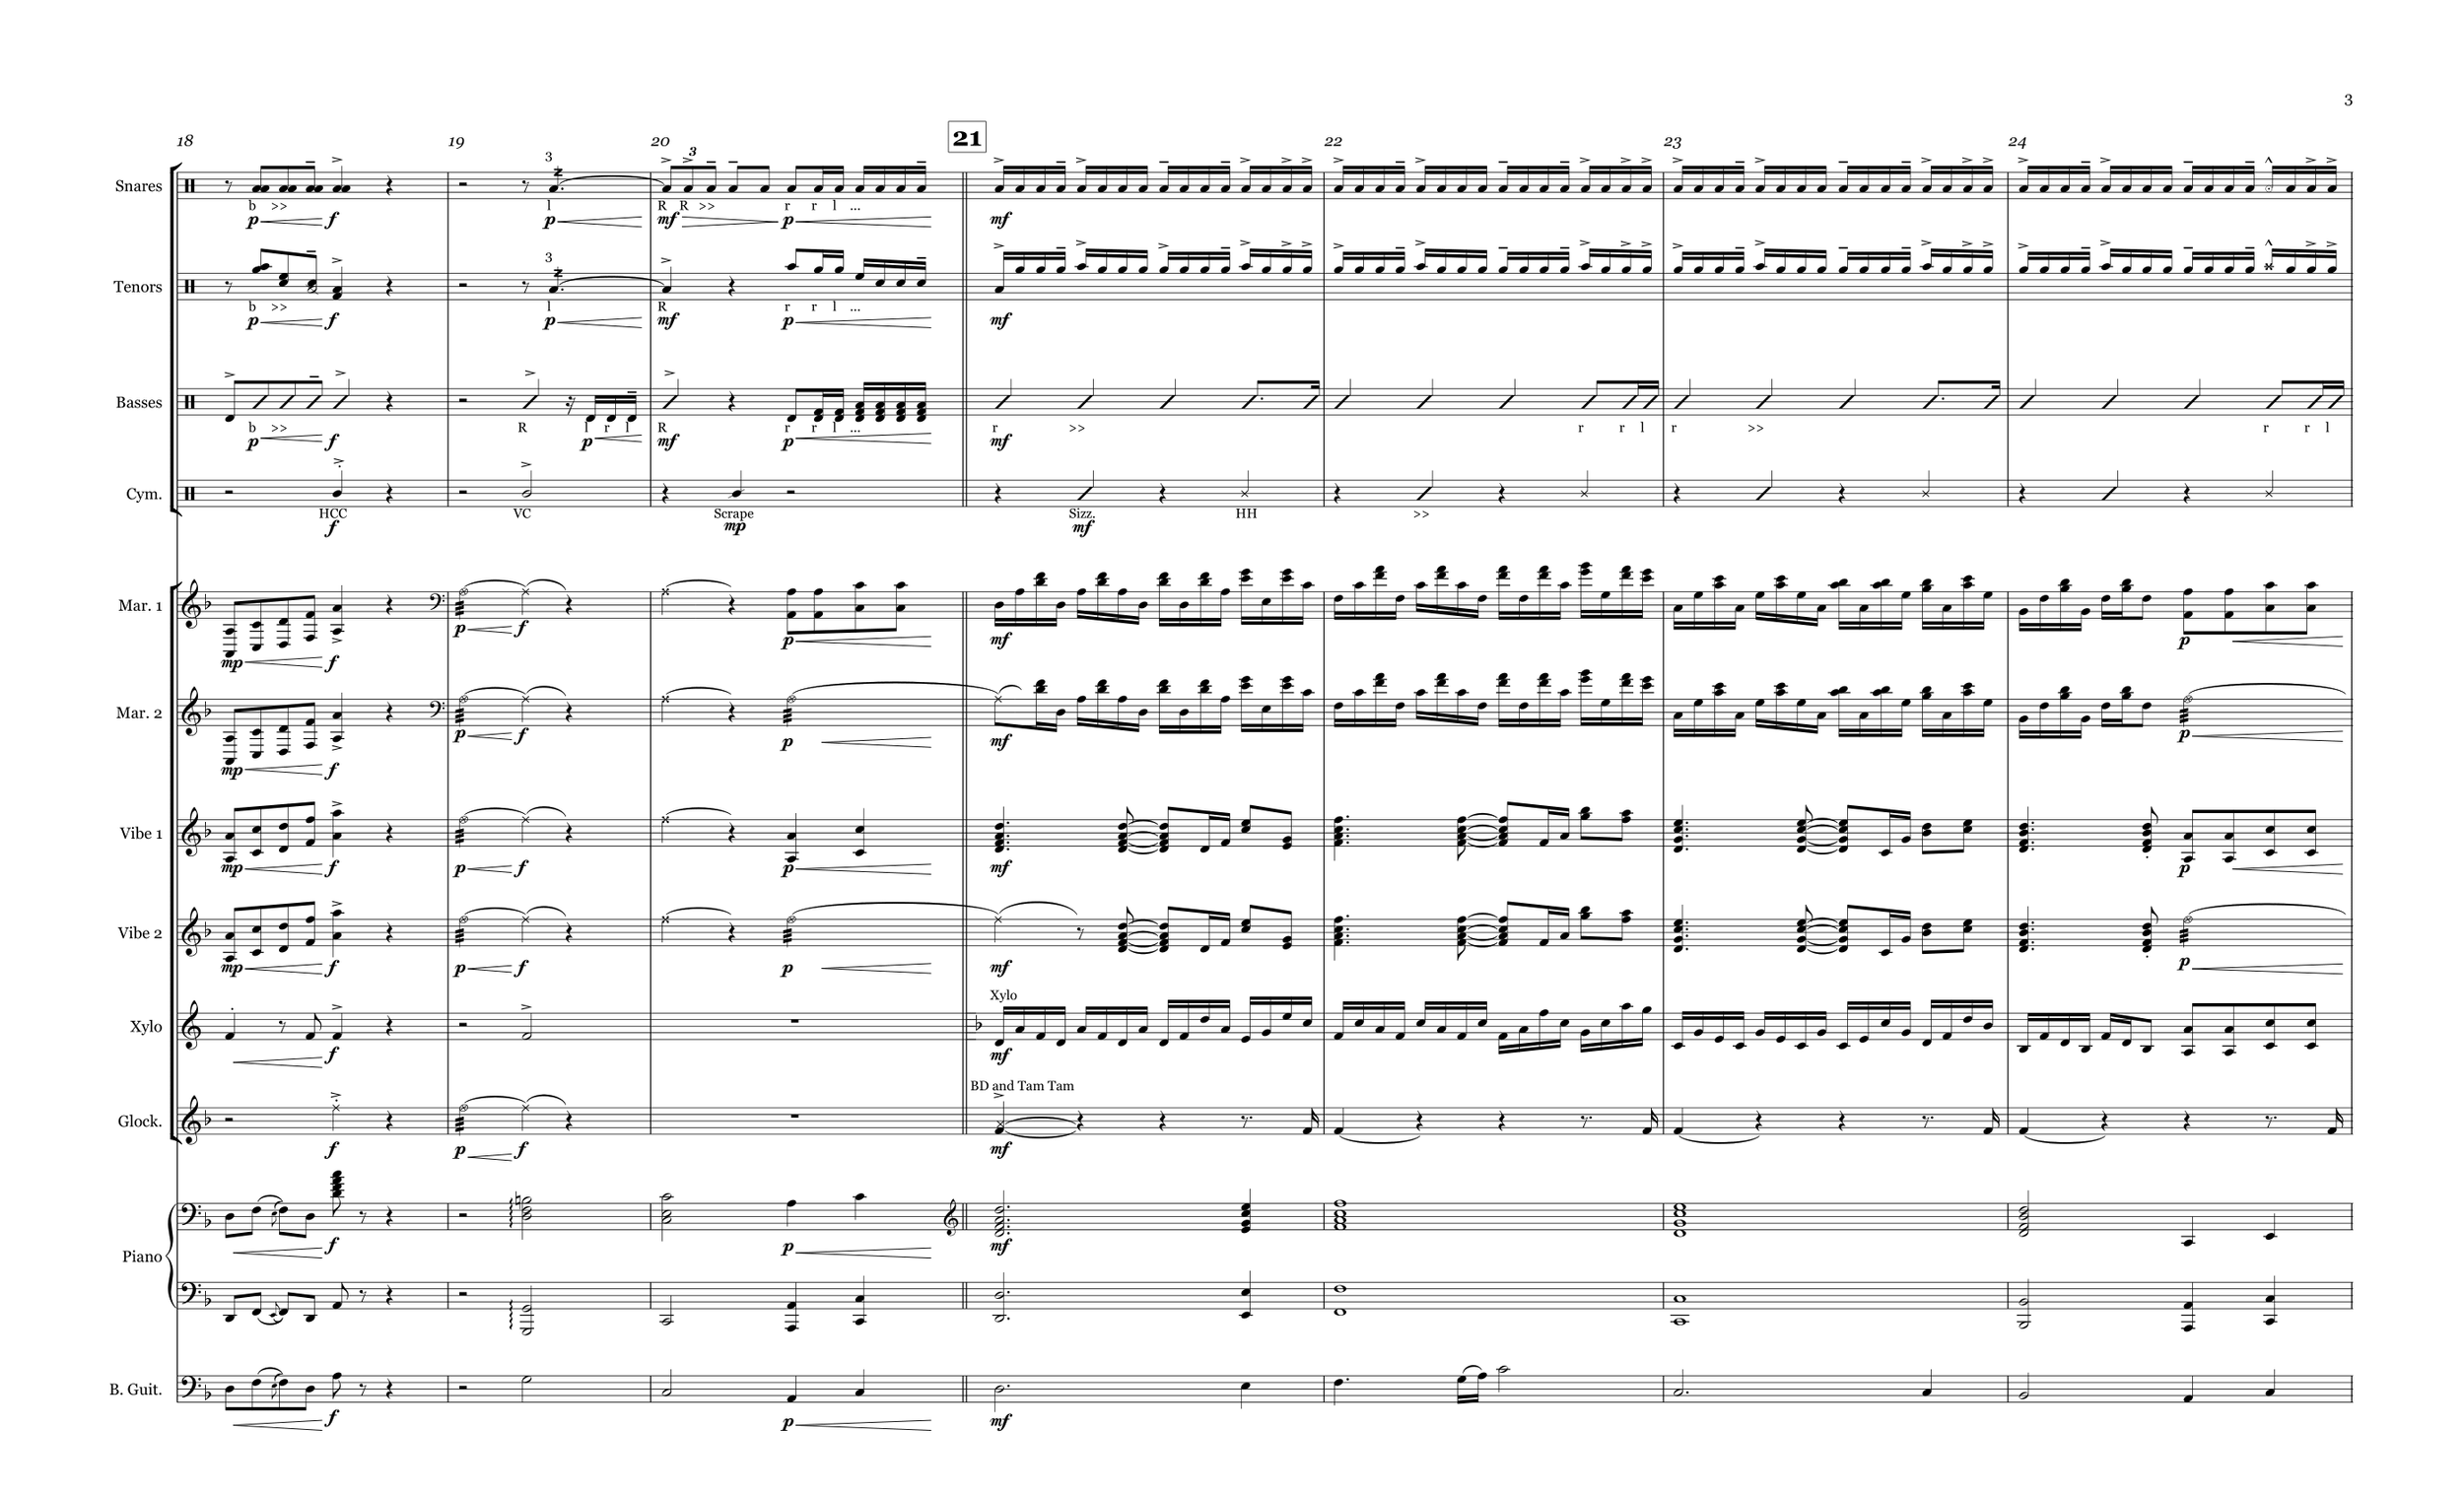 Stand Up Percussion Score Final - Full Score (legal for YT)-03.png